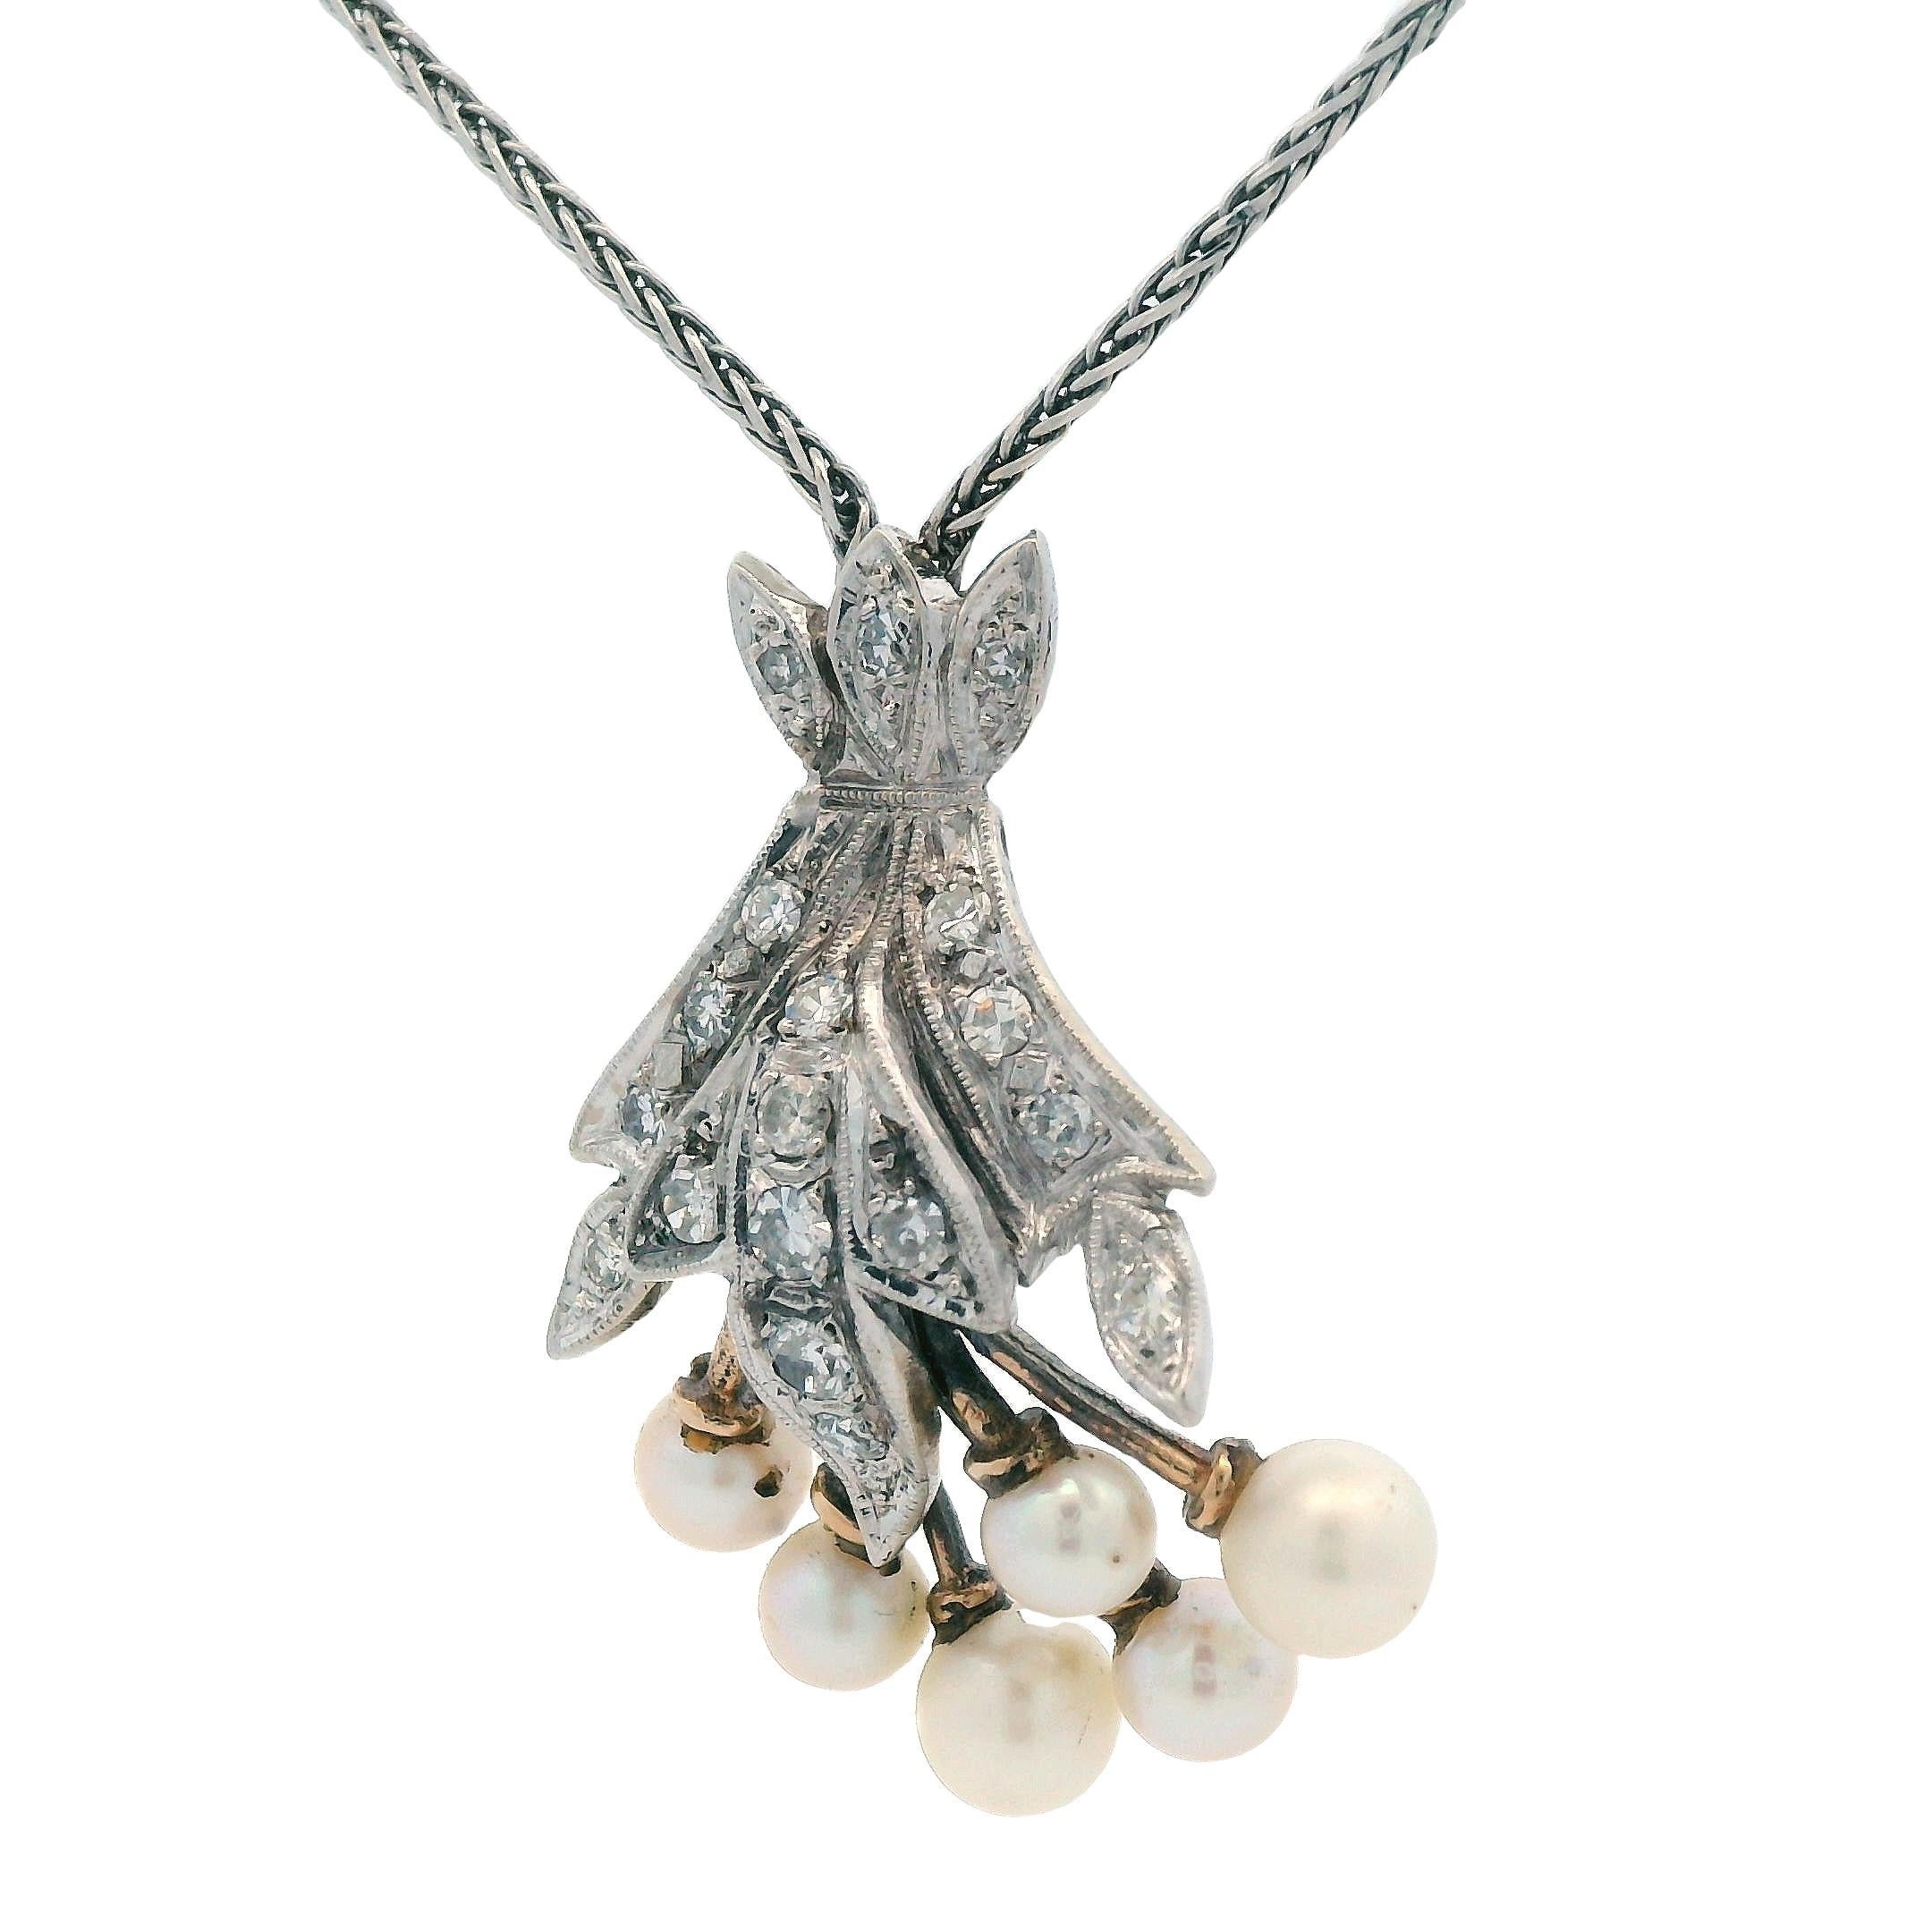 This stunning pendant necklace is made in 14k white gold with round cut diamond and white cultured pearls. This necklace is the perfect collection item for anyone looking to add a set of pearls to their set, while still maintaining the natural